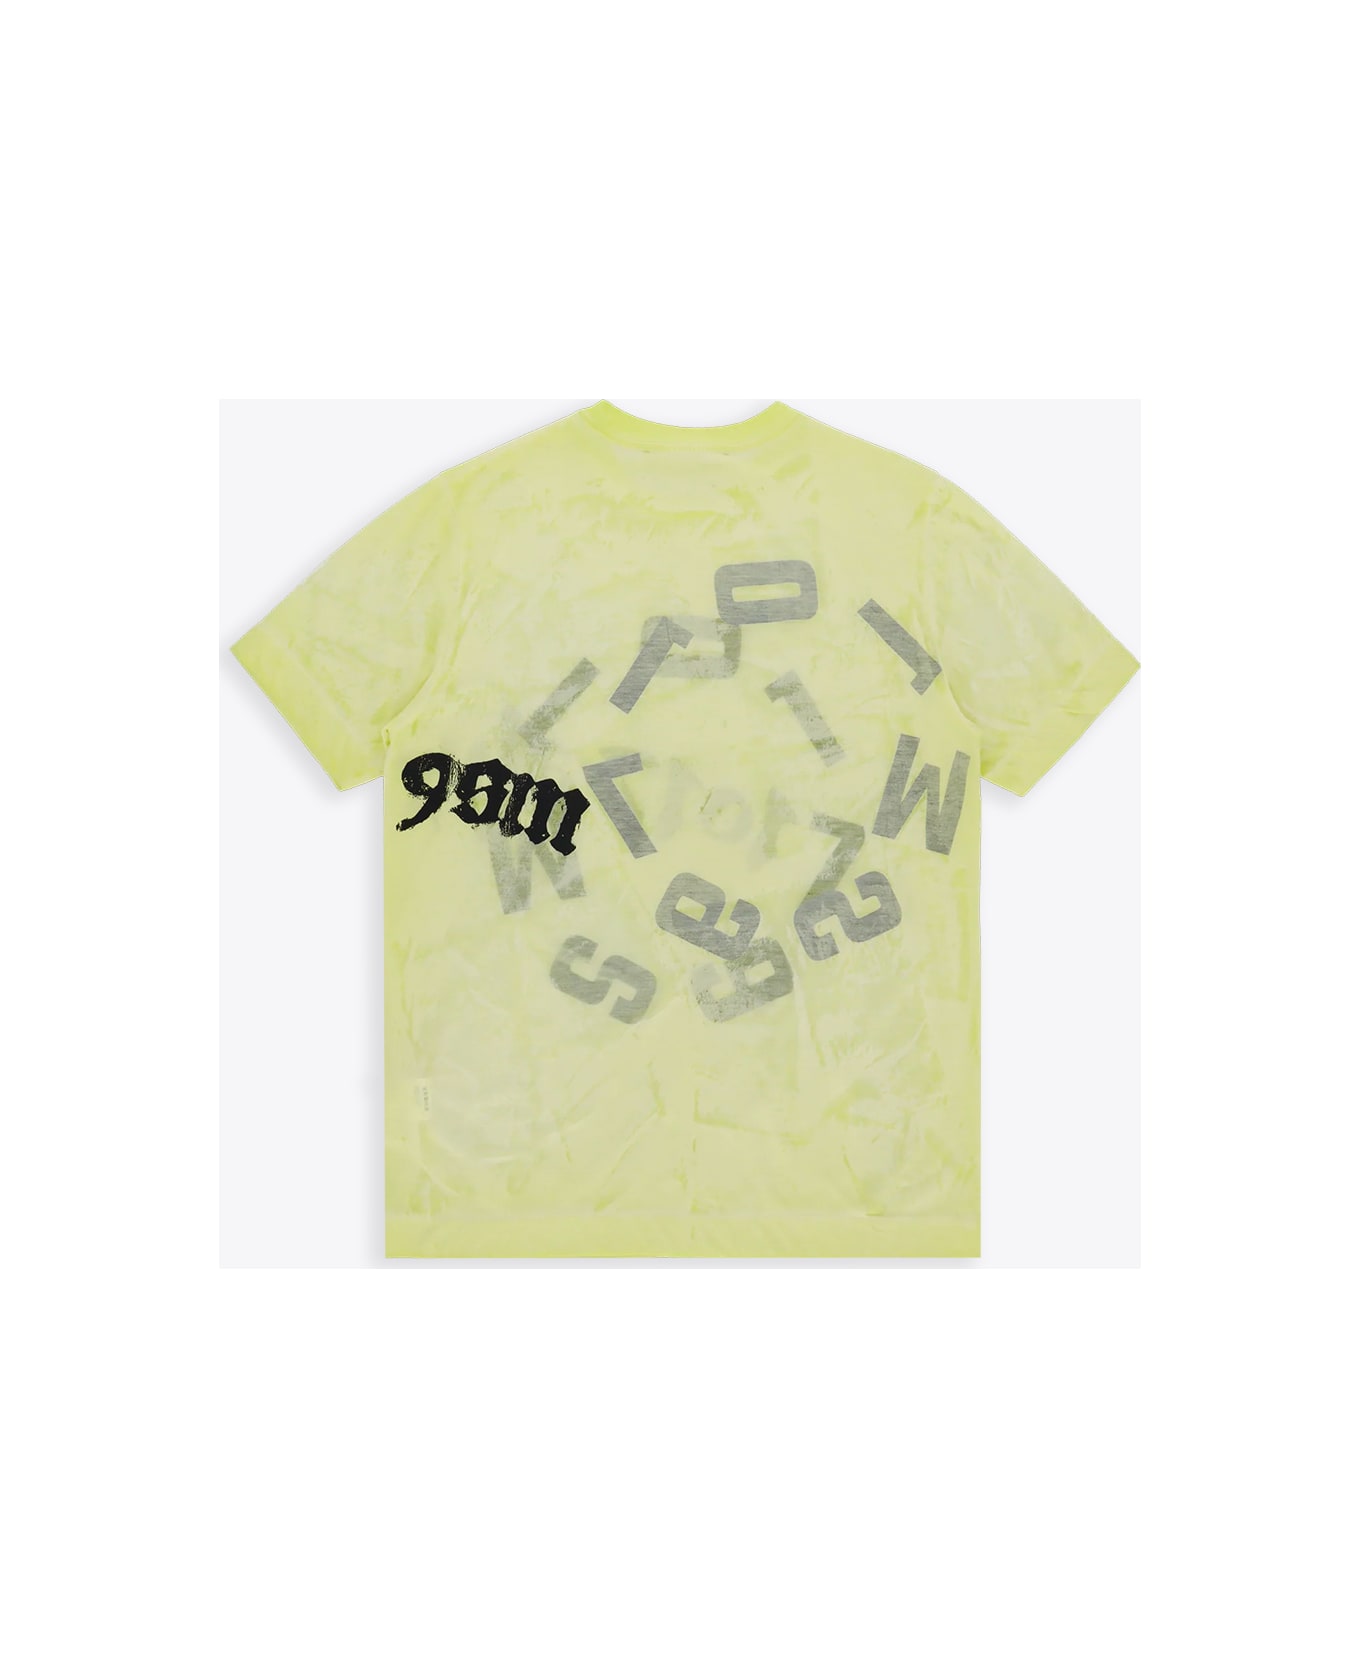 1017 ALYX 9SM Translucent Graphic S/s T-shirt Neon Yellow Cotton Translucent T-shirt - Translucent Graphic S/s T-shirt - Giallo